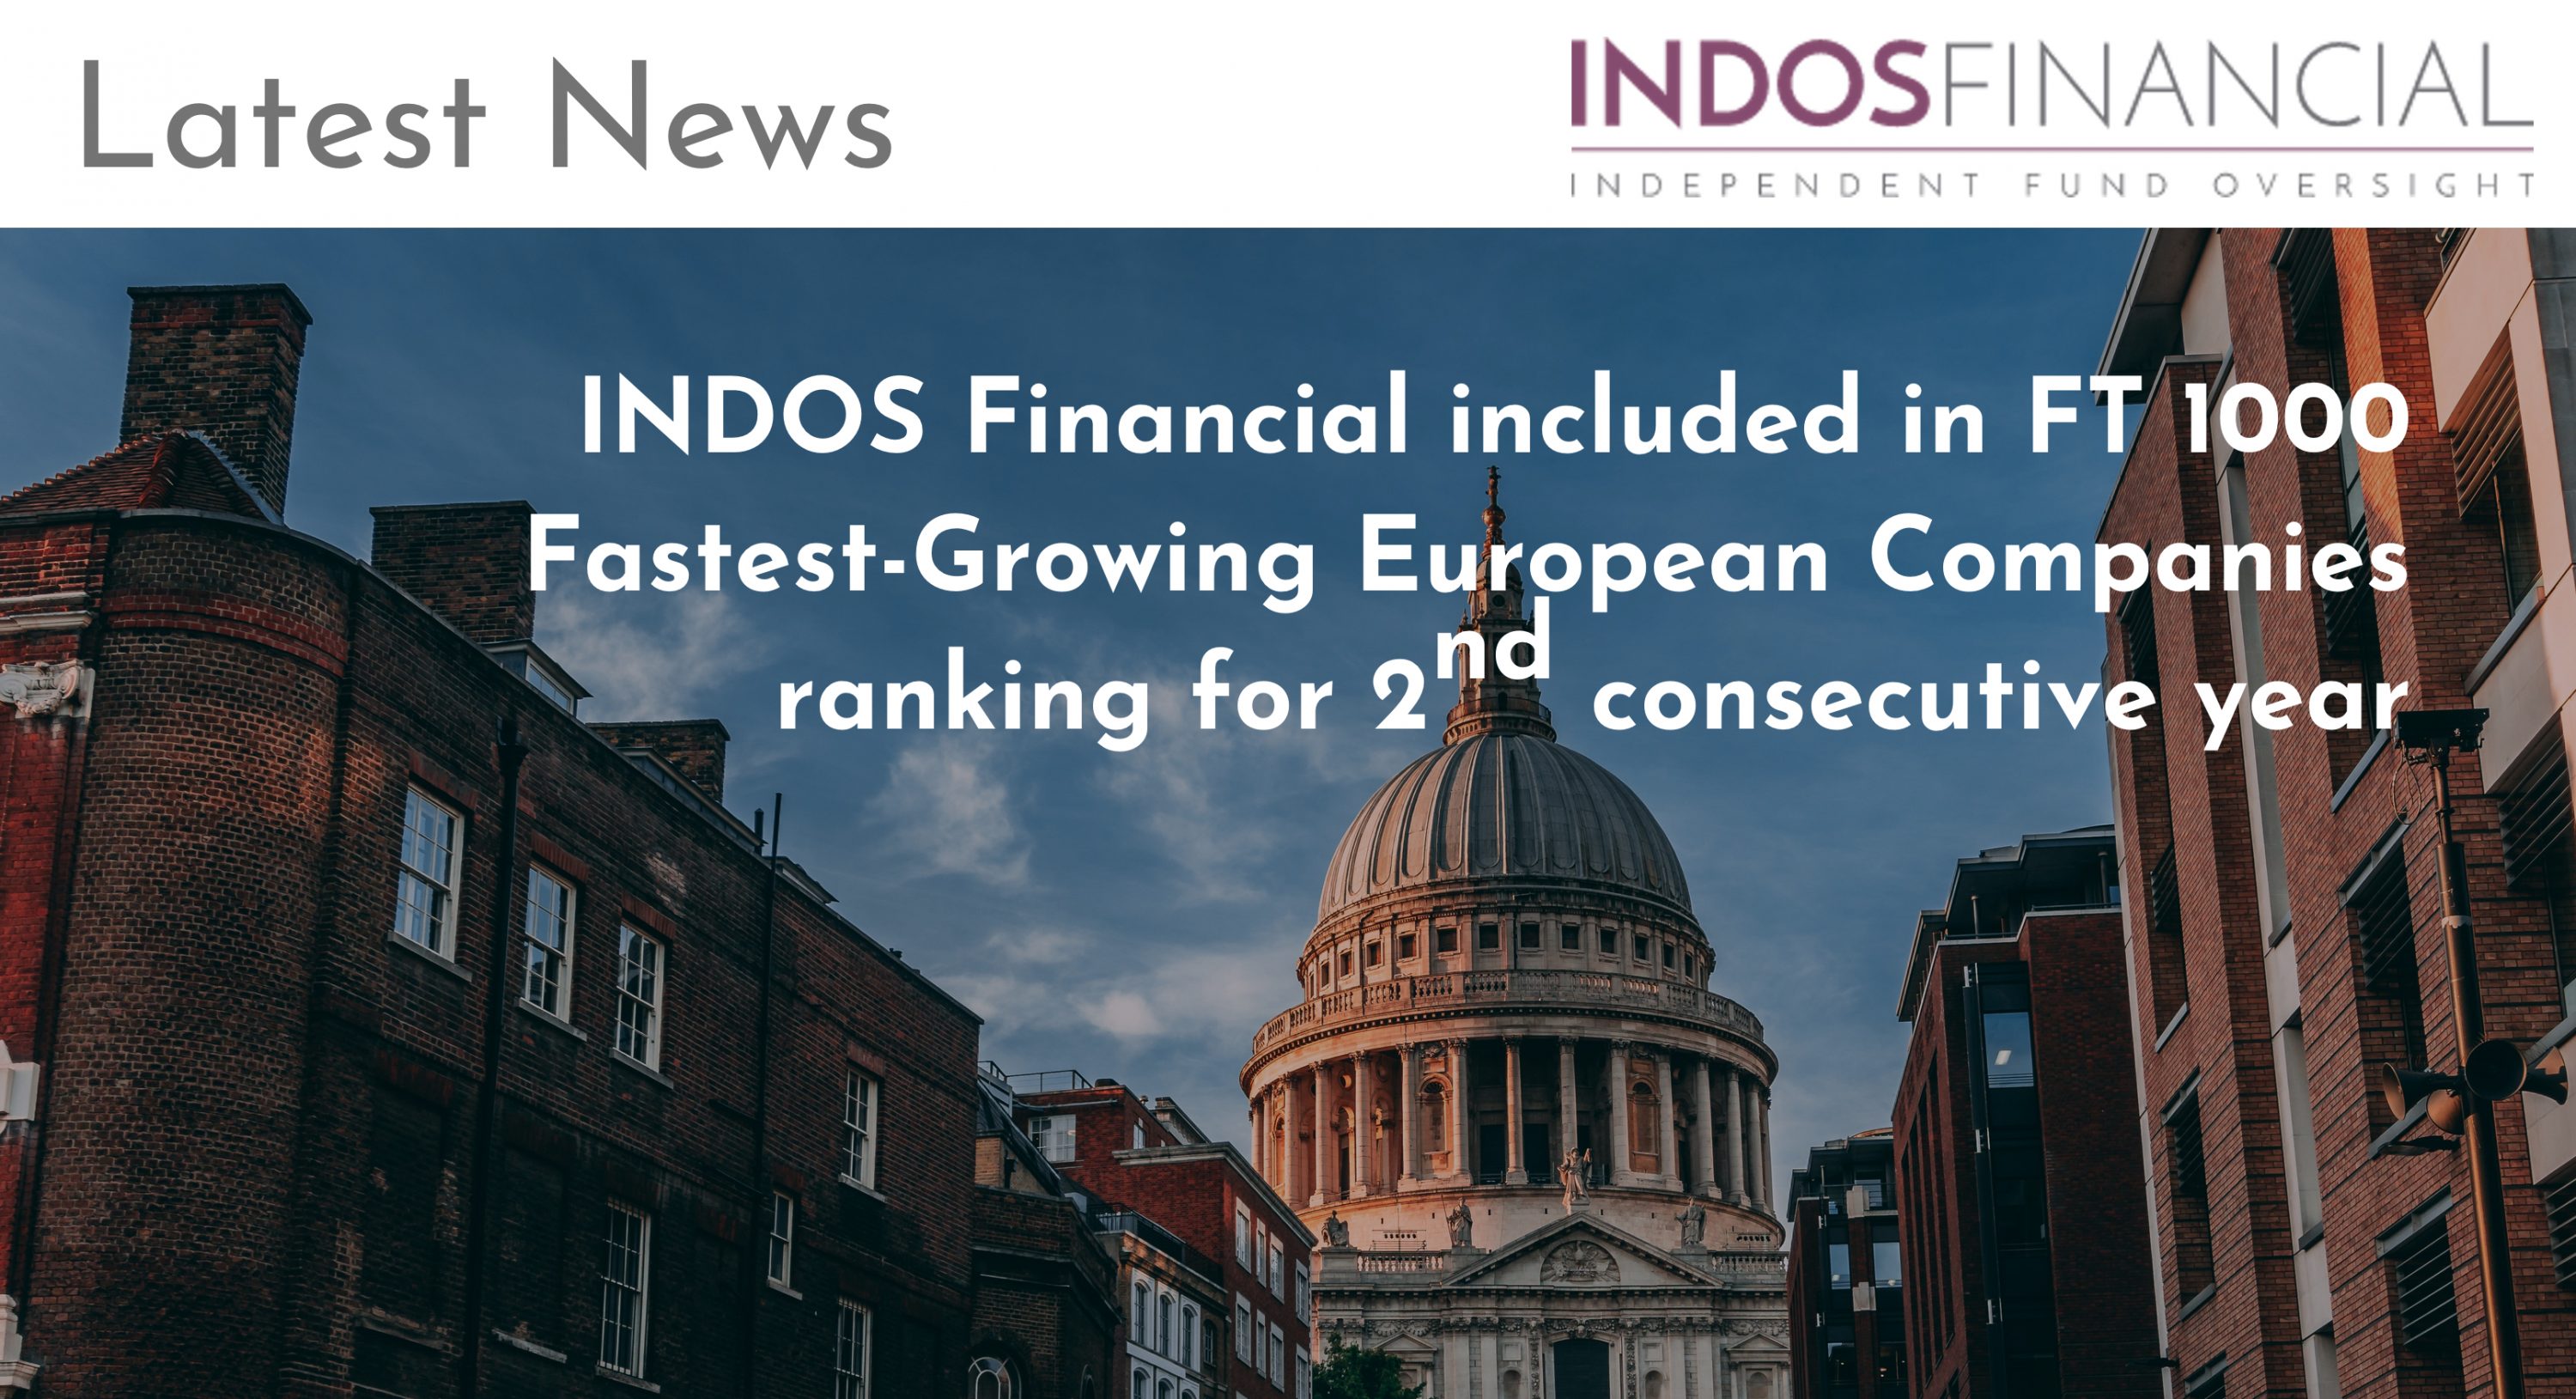 INDOS Financial included in FT 1000 Fastest-Growing European Companies